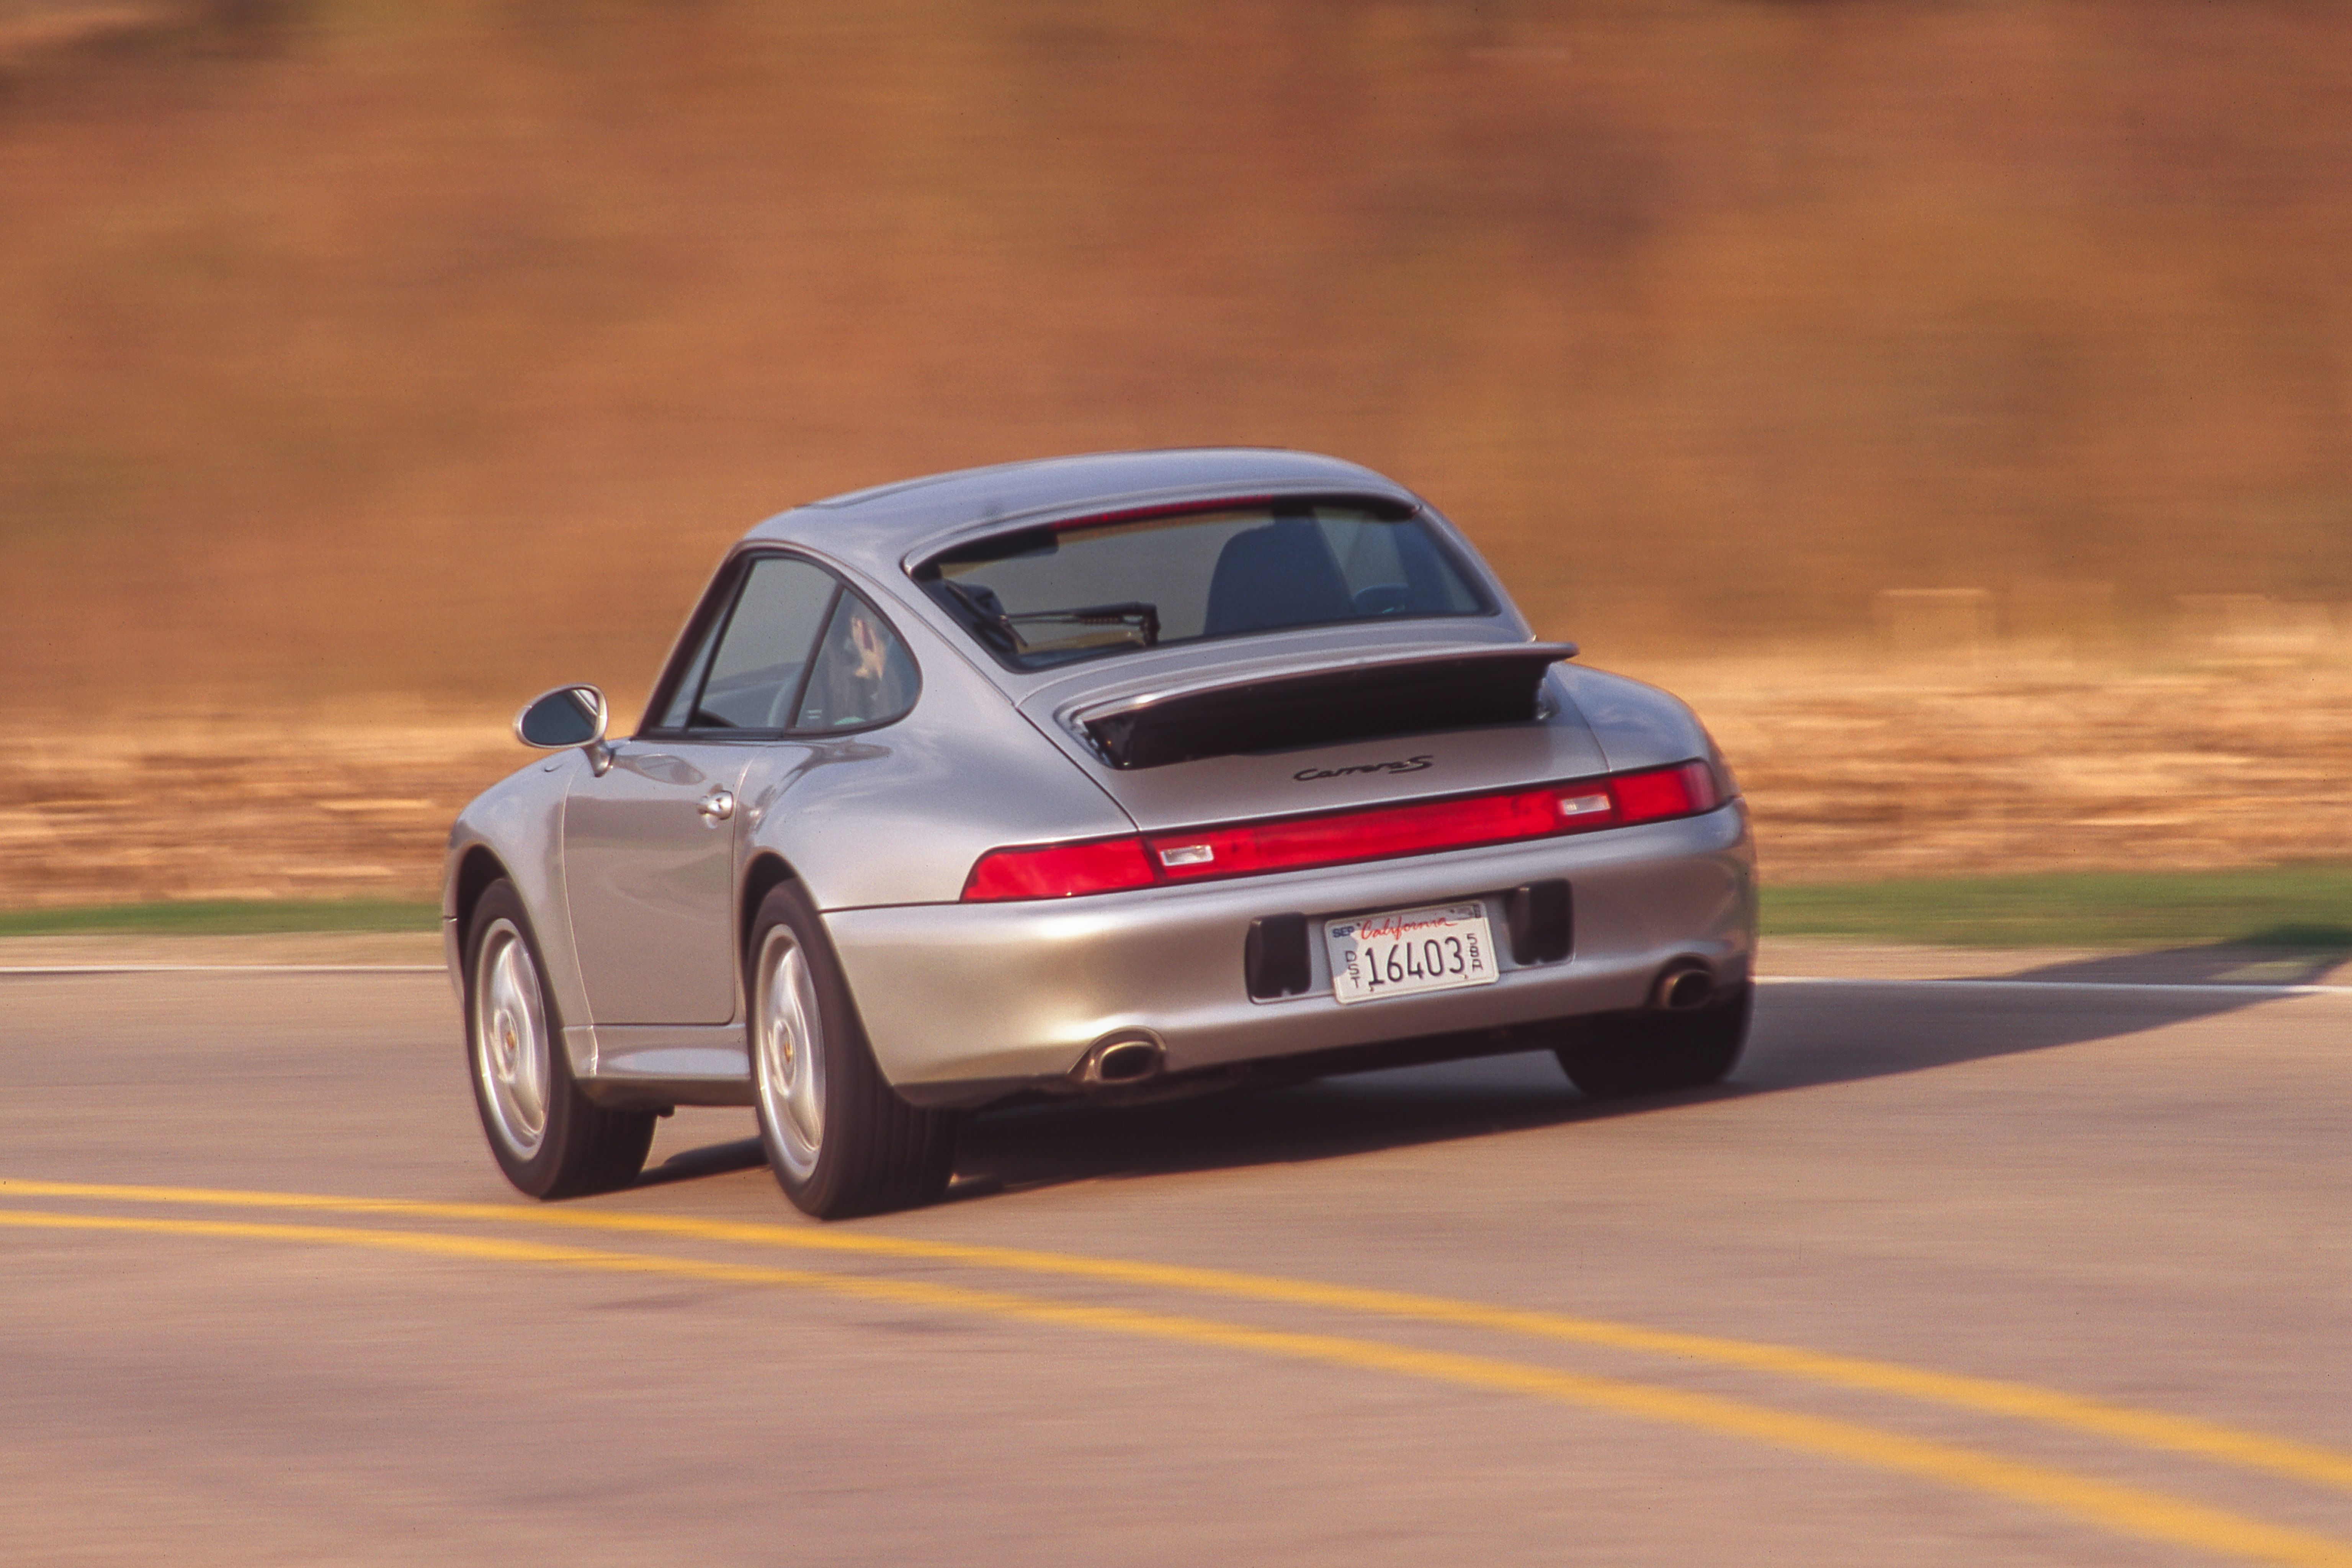 Tested: 1997 Porsche 911 Carrera S Ends the Line